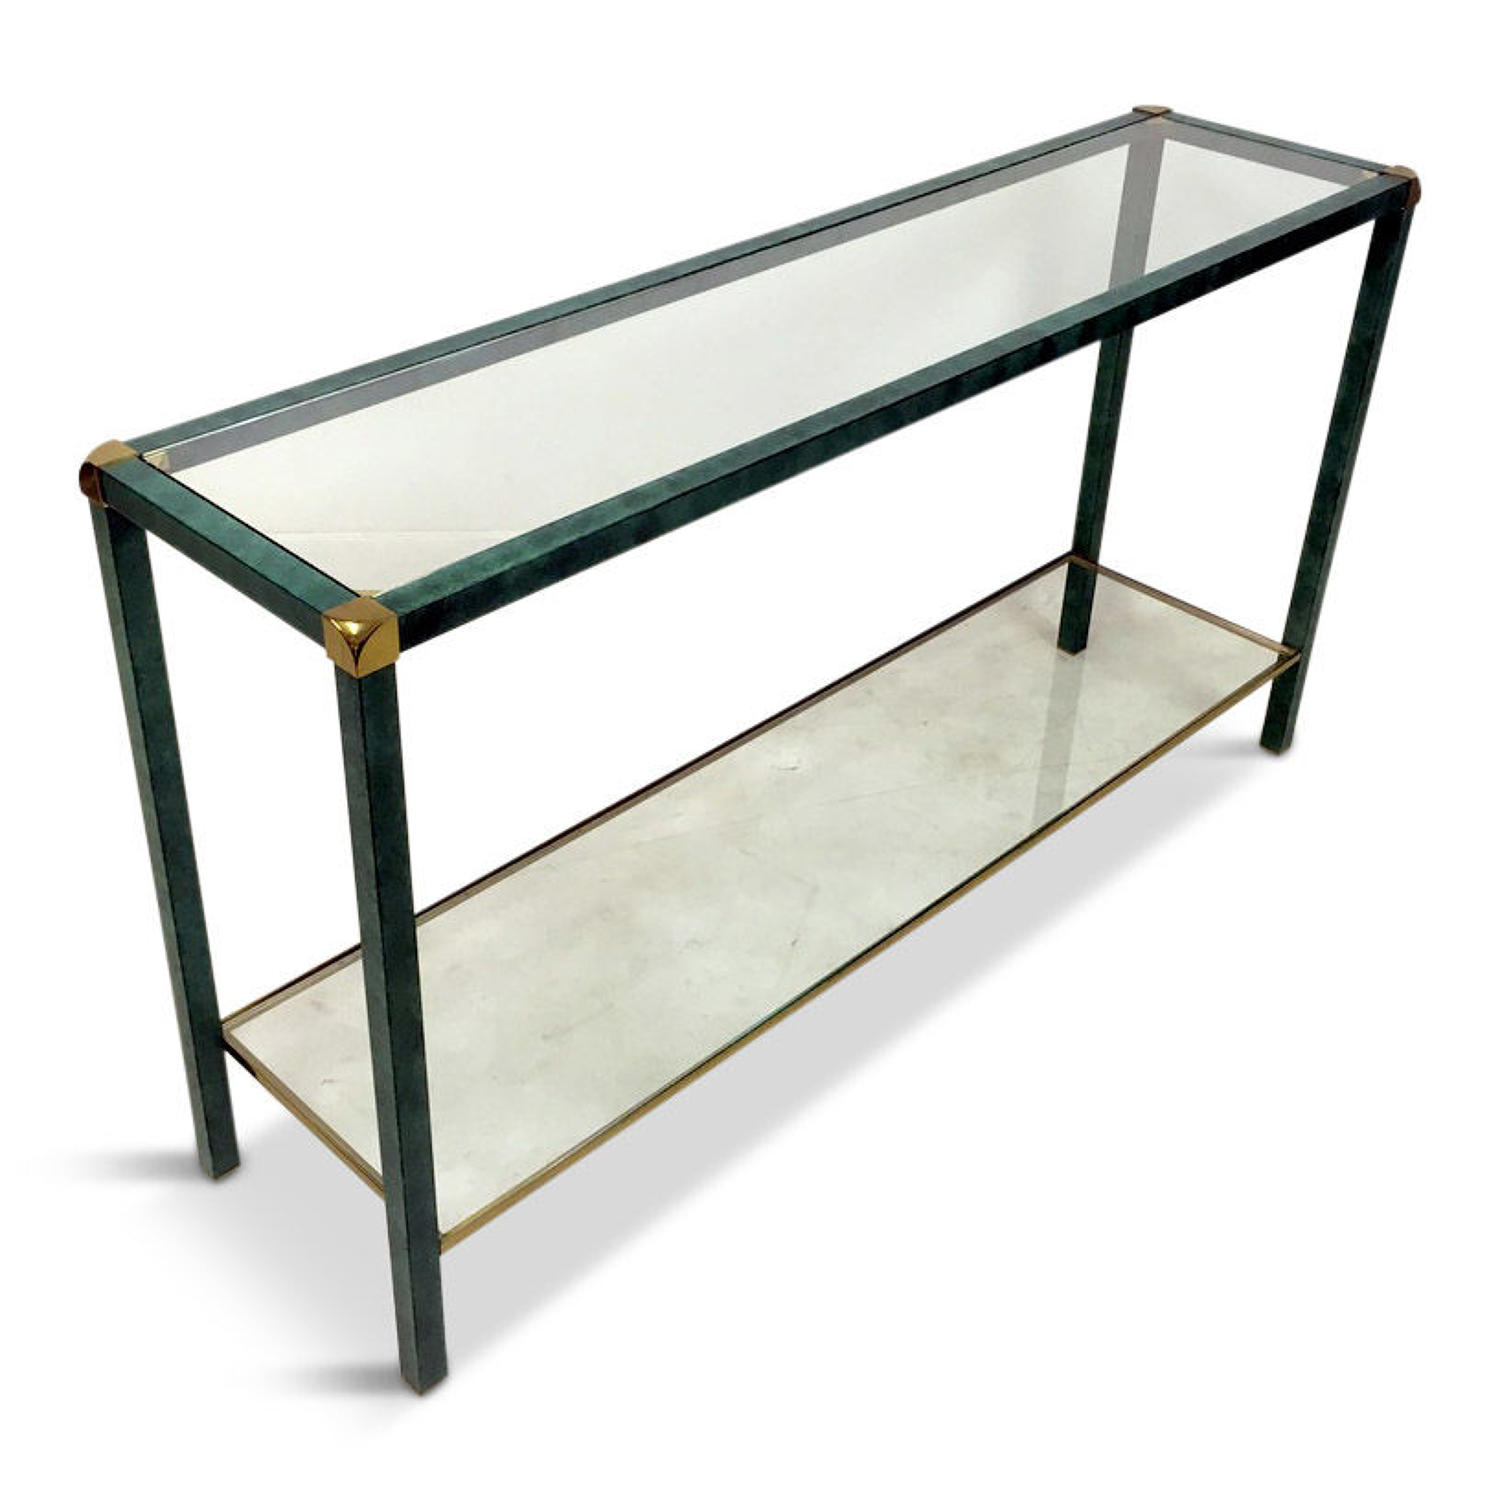 A 1970s French green and brass console table